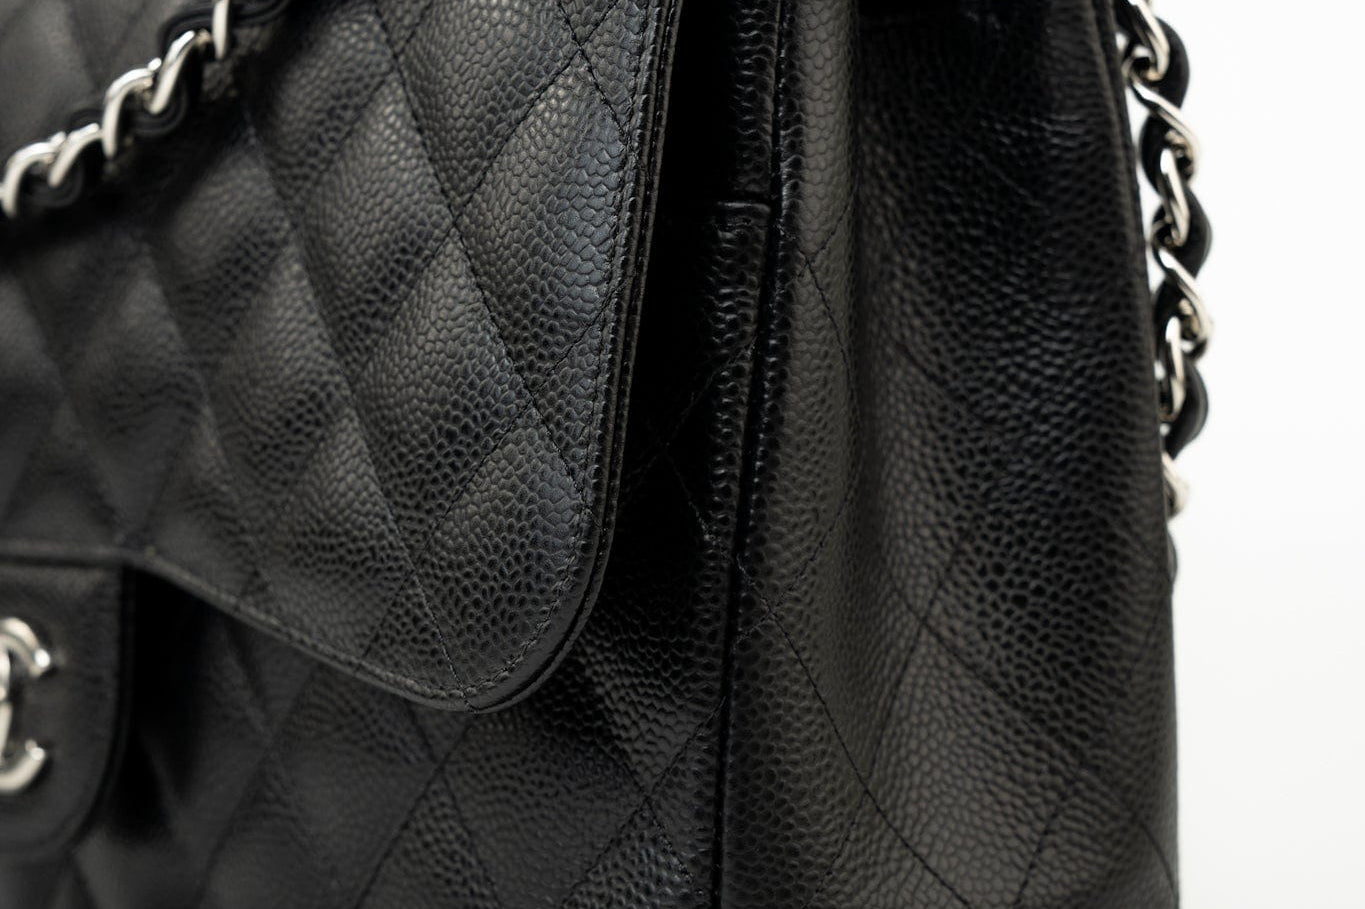 CHANEL Handbag Black Jumbo Caviar Quilted Classic Flap Silver Hardware - Redeluxe